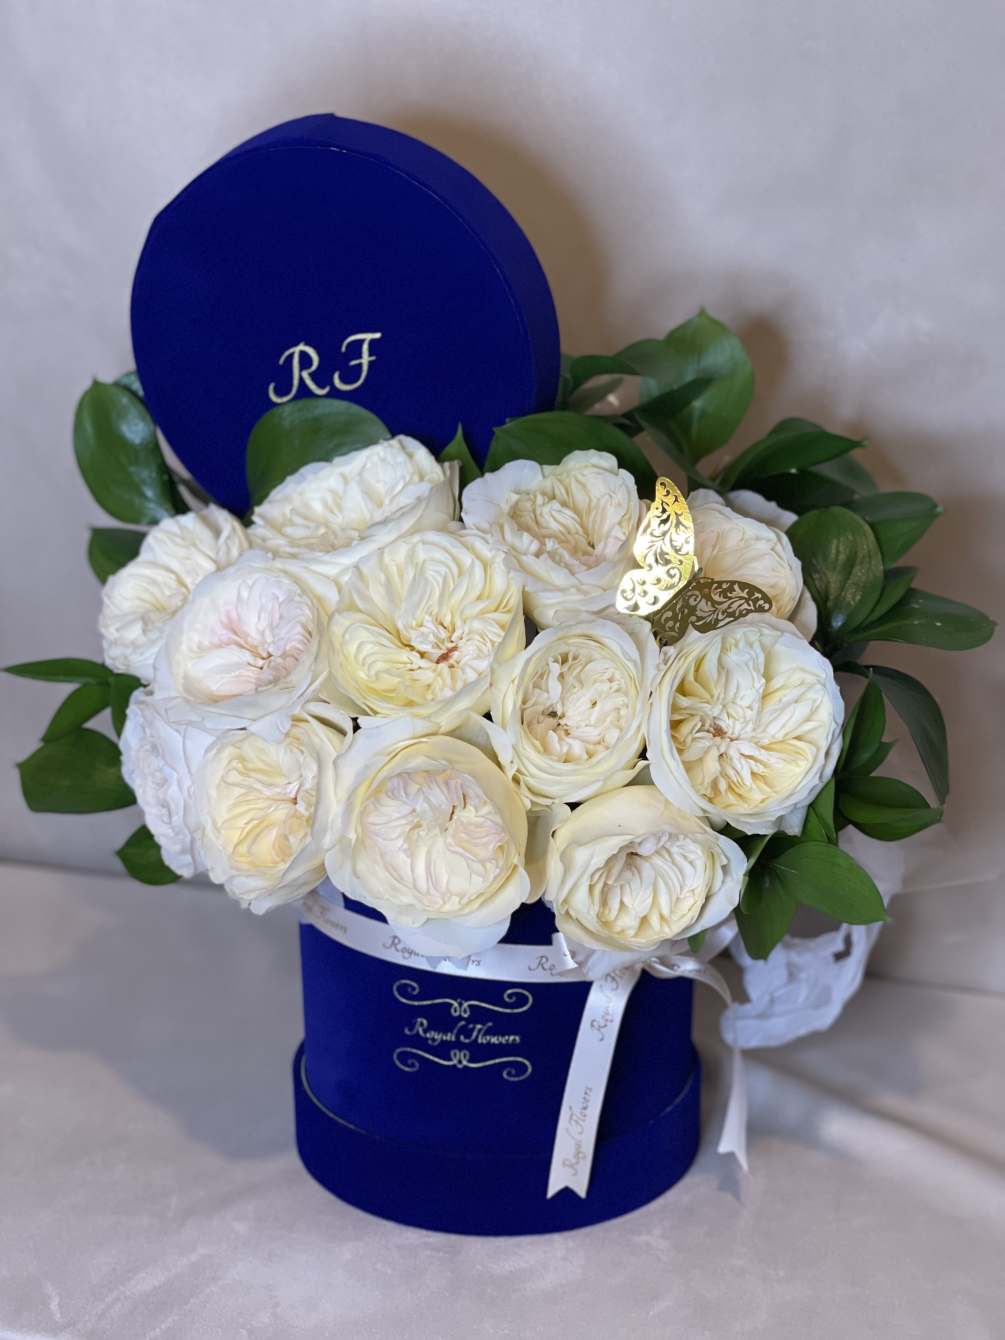 The fragrance of these garden roses will never be forgotten! 12 premium